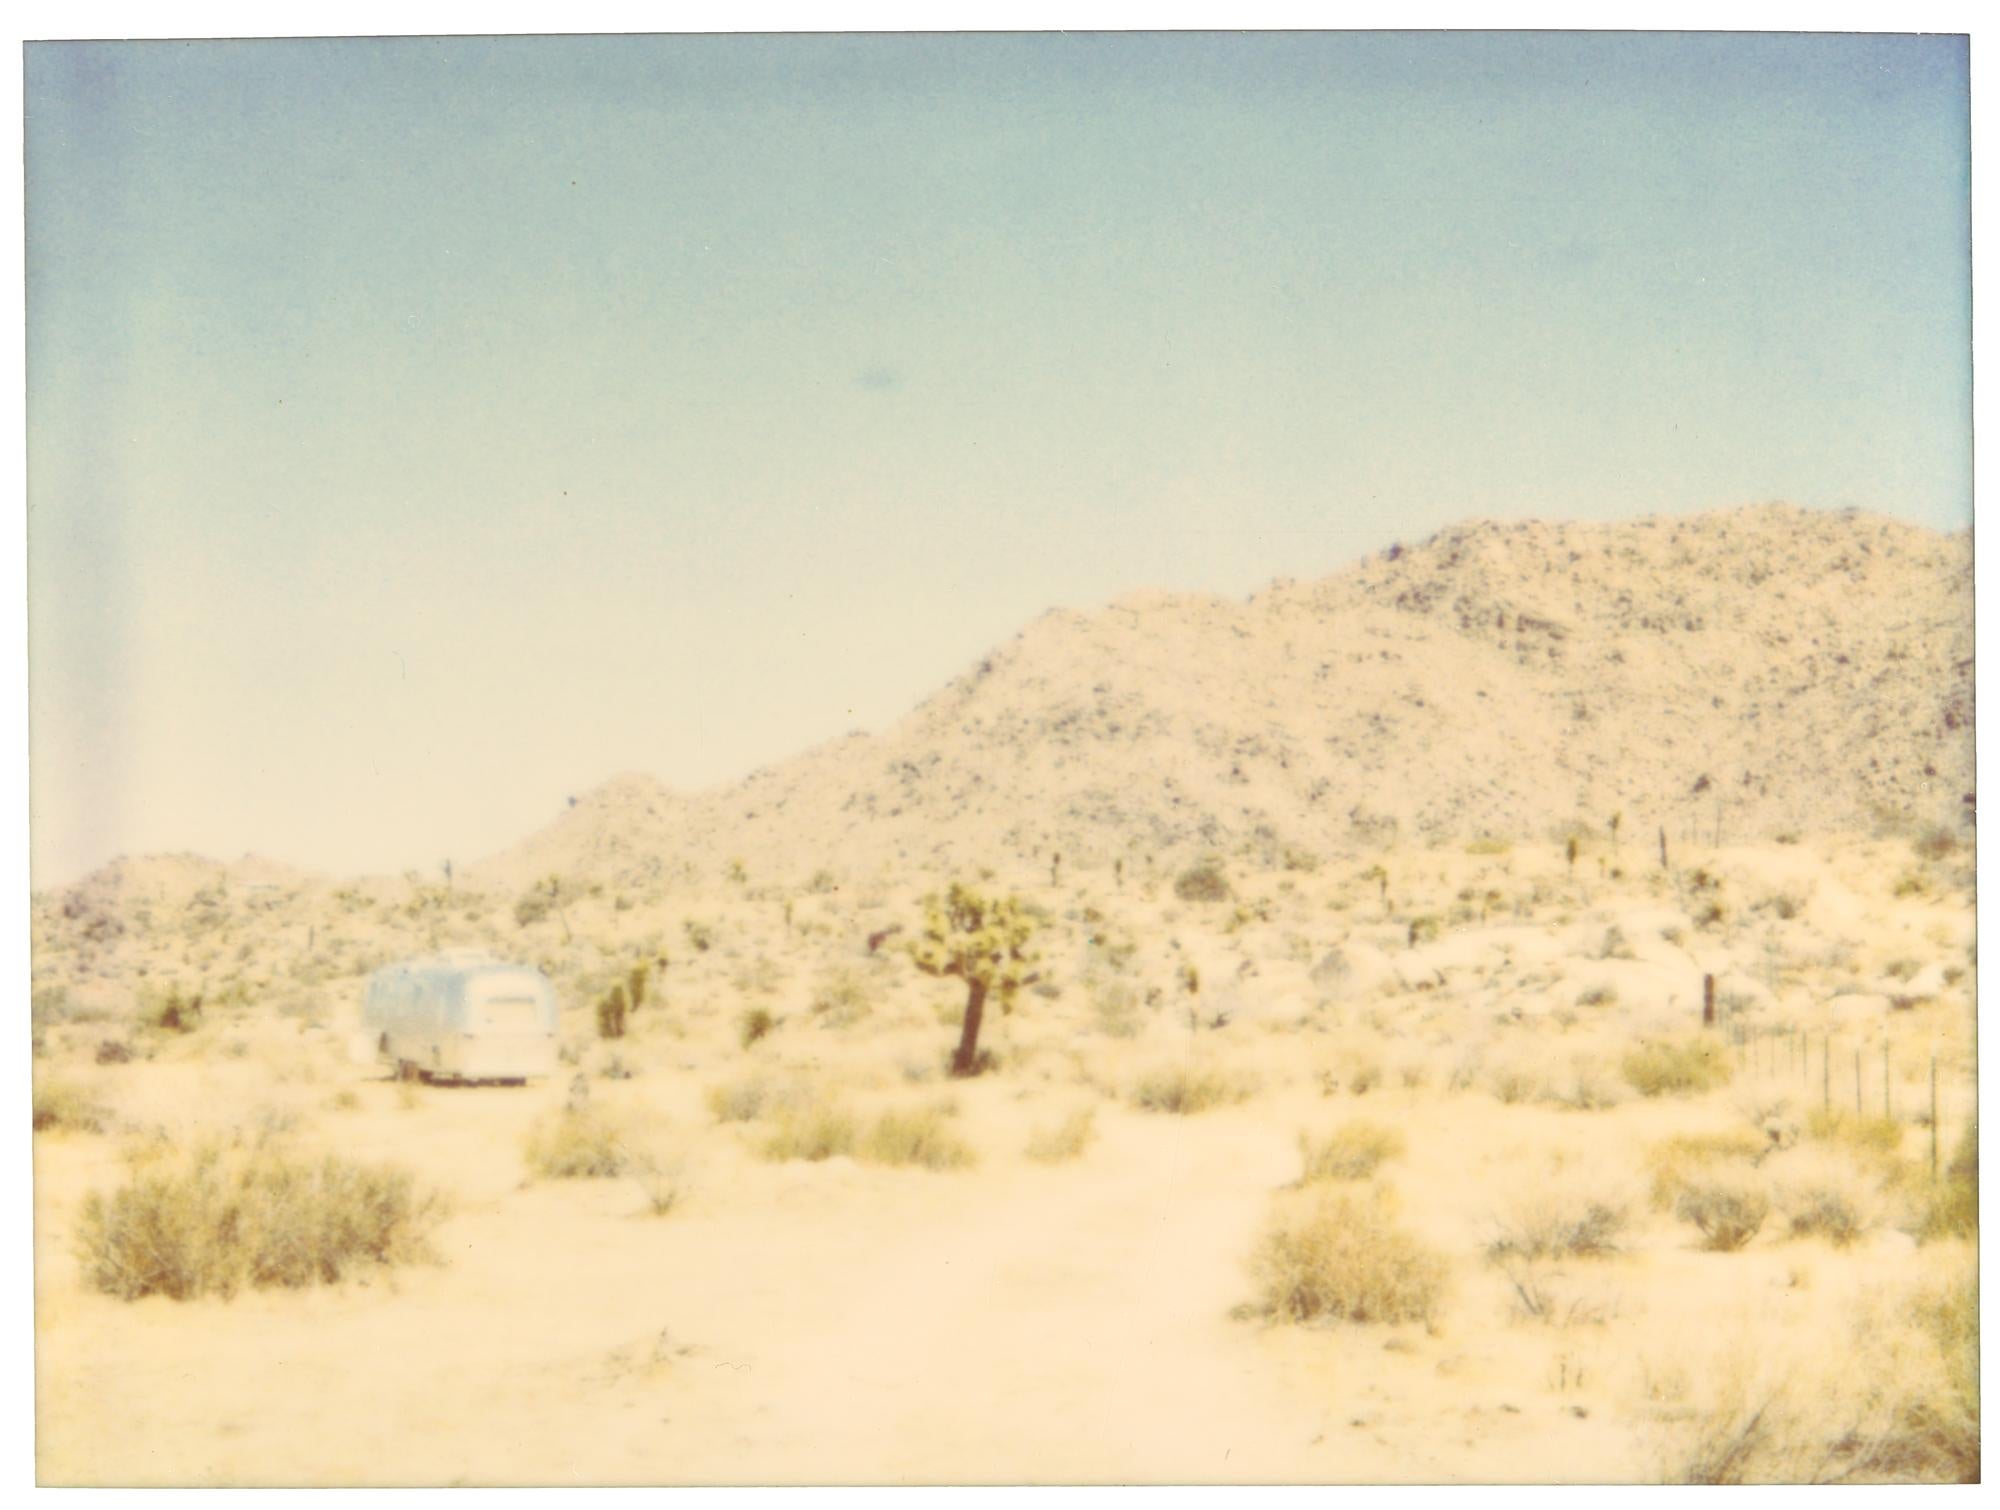 Stefanie Schneider Color Photograph - Old Woman Spring Road (29 Palms, CA)